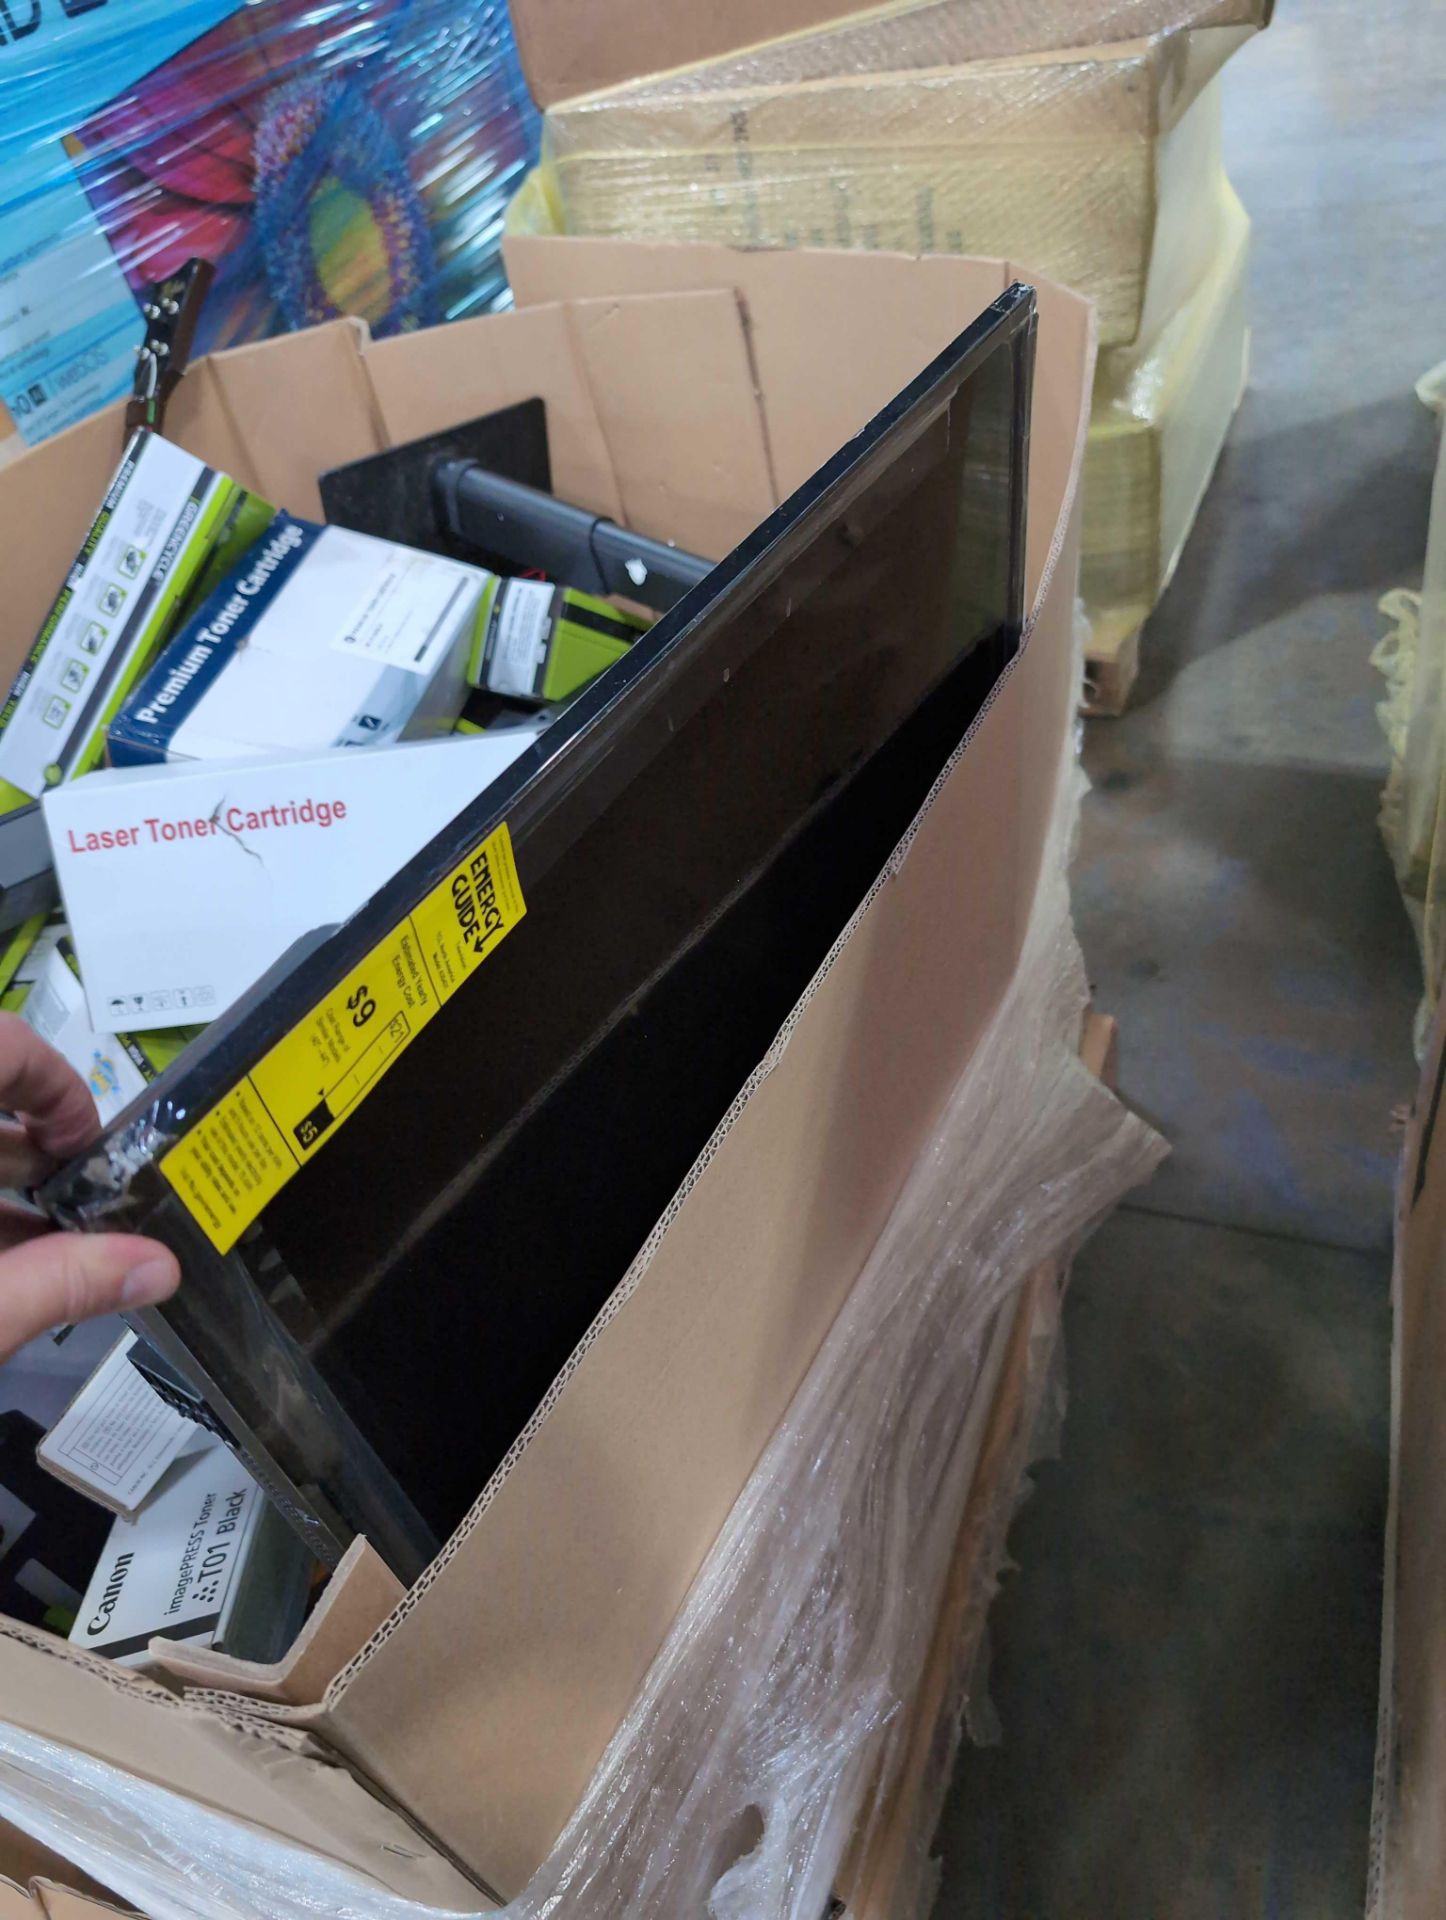 sleeve of electronics monitor, toners cartridges, air fryer and other electronic items - Image 3 of 15